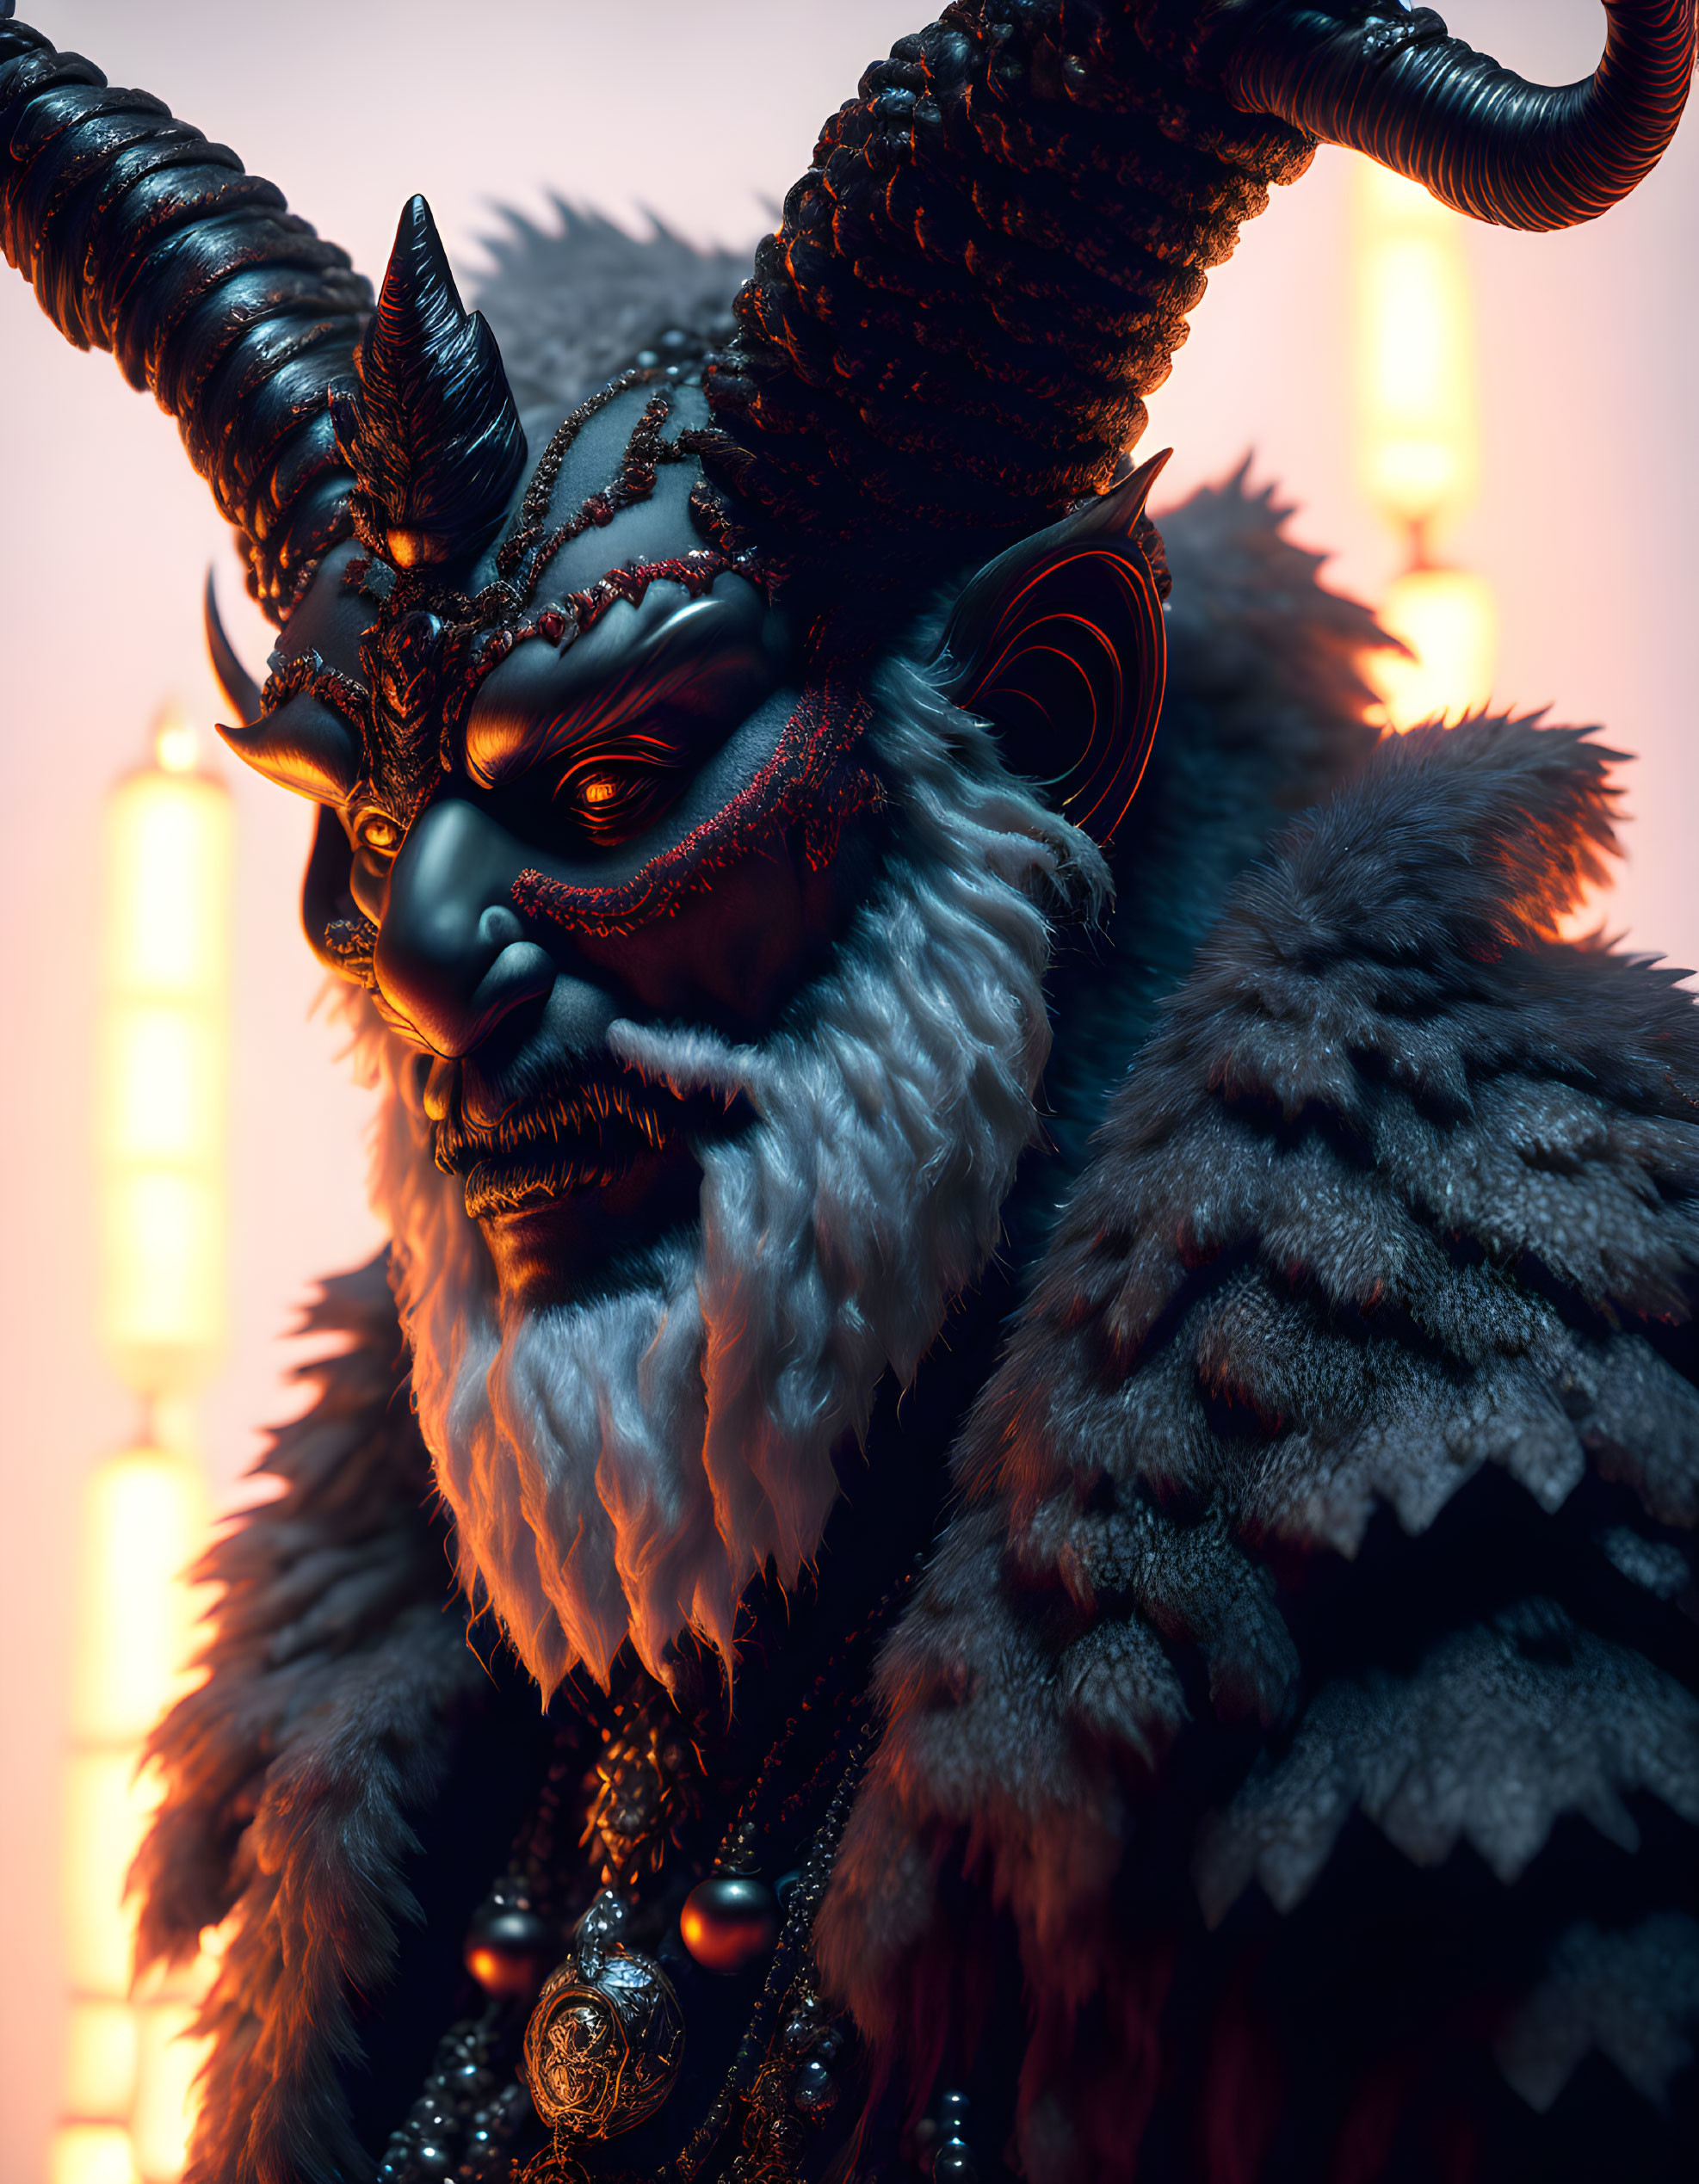 Horned fantasy character with white beard and blue face paint in ornate jewelry